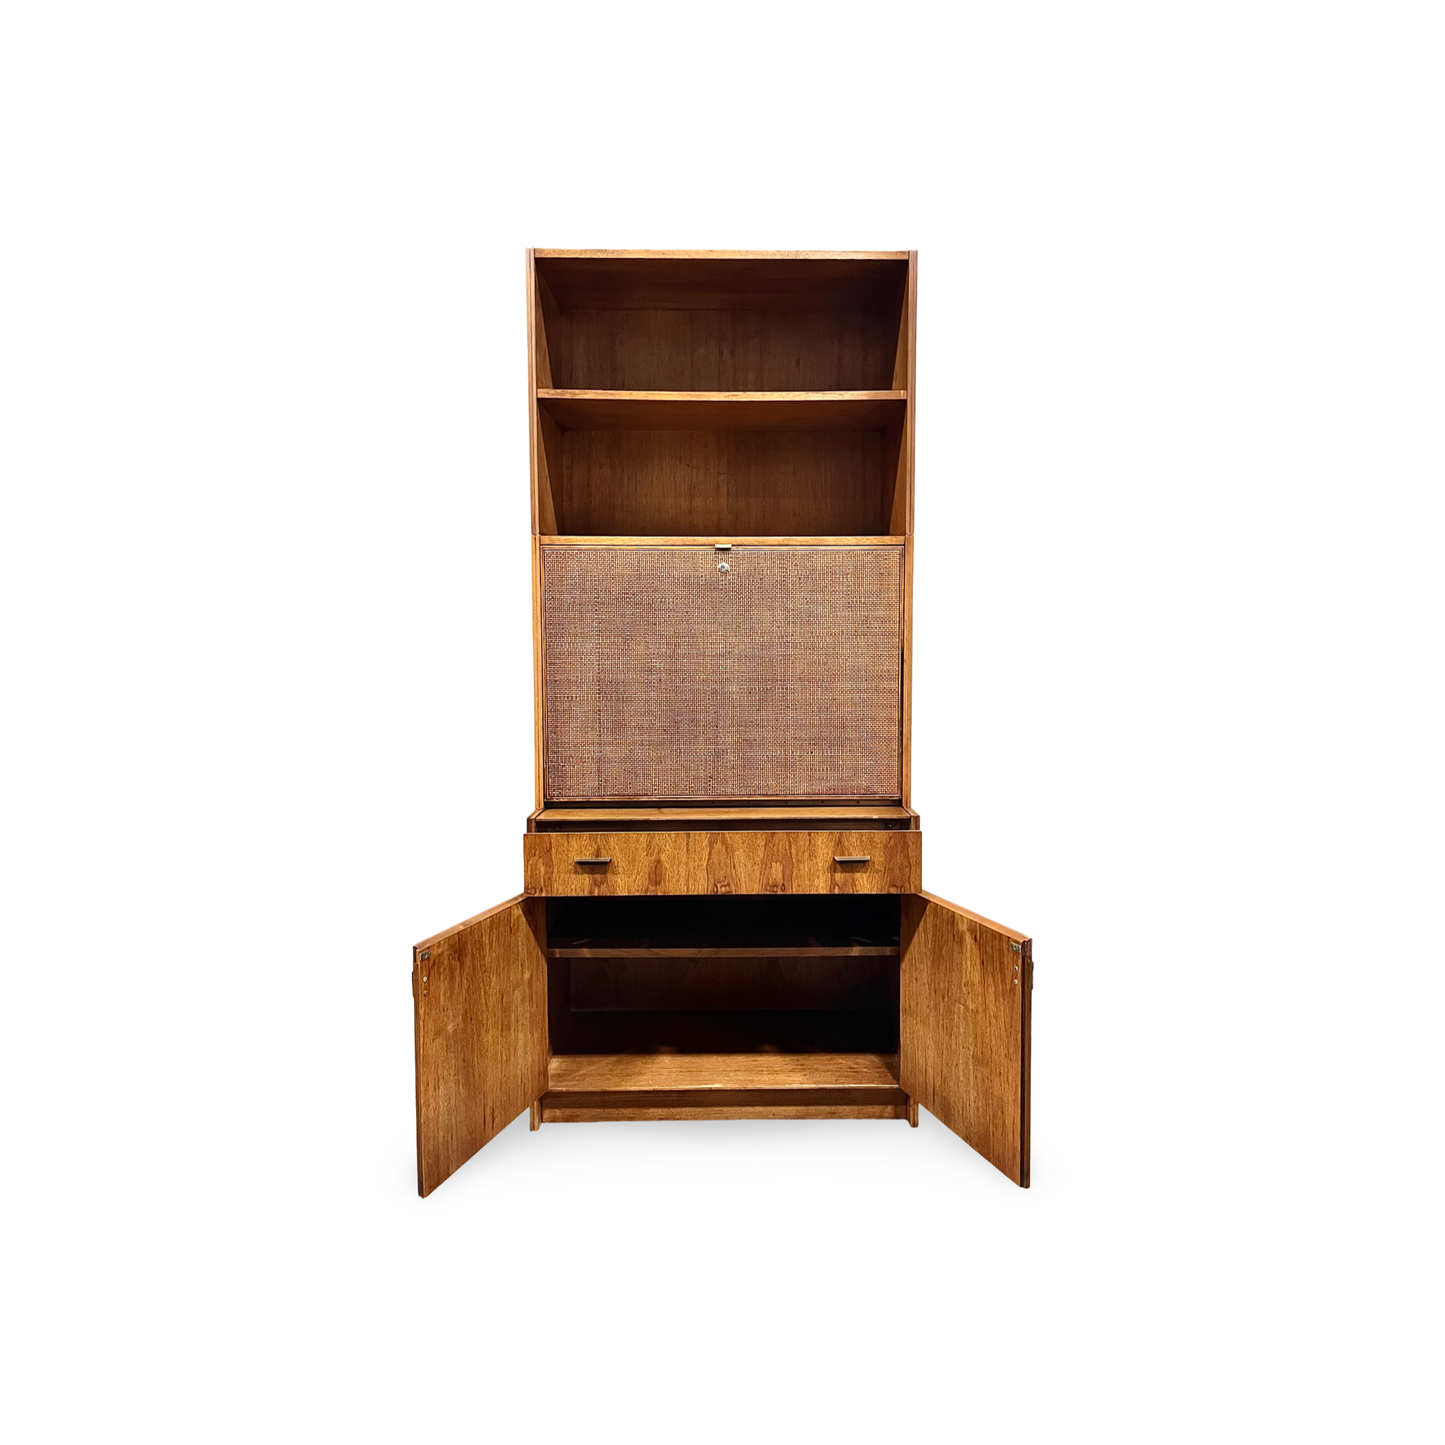 Jack Cartwright for Founders Patterns 15 Mid Century Modern Bookshelf Cabinet with Drop Down Desk c. 1960s